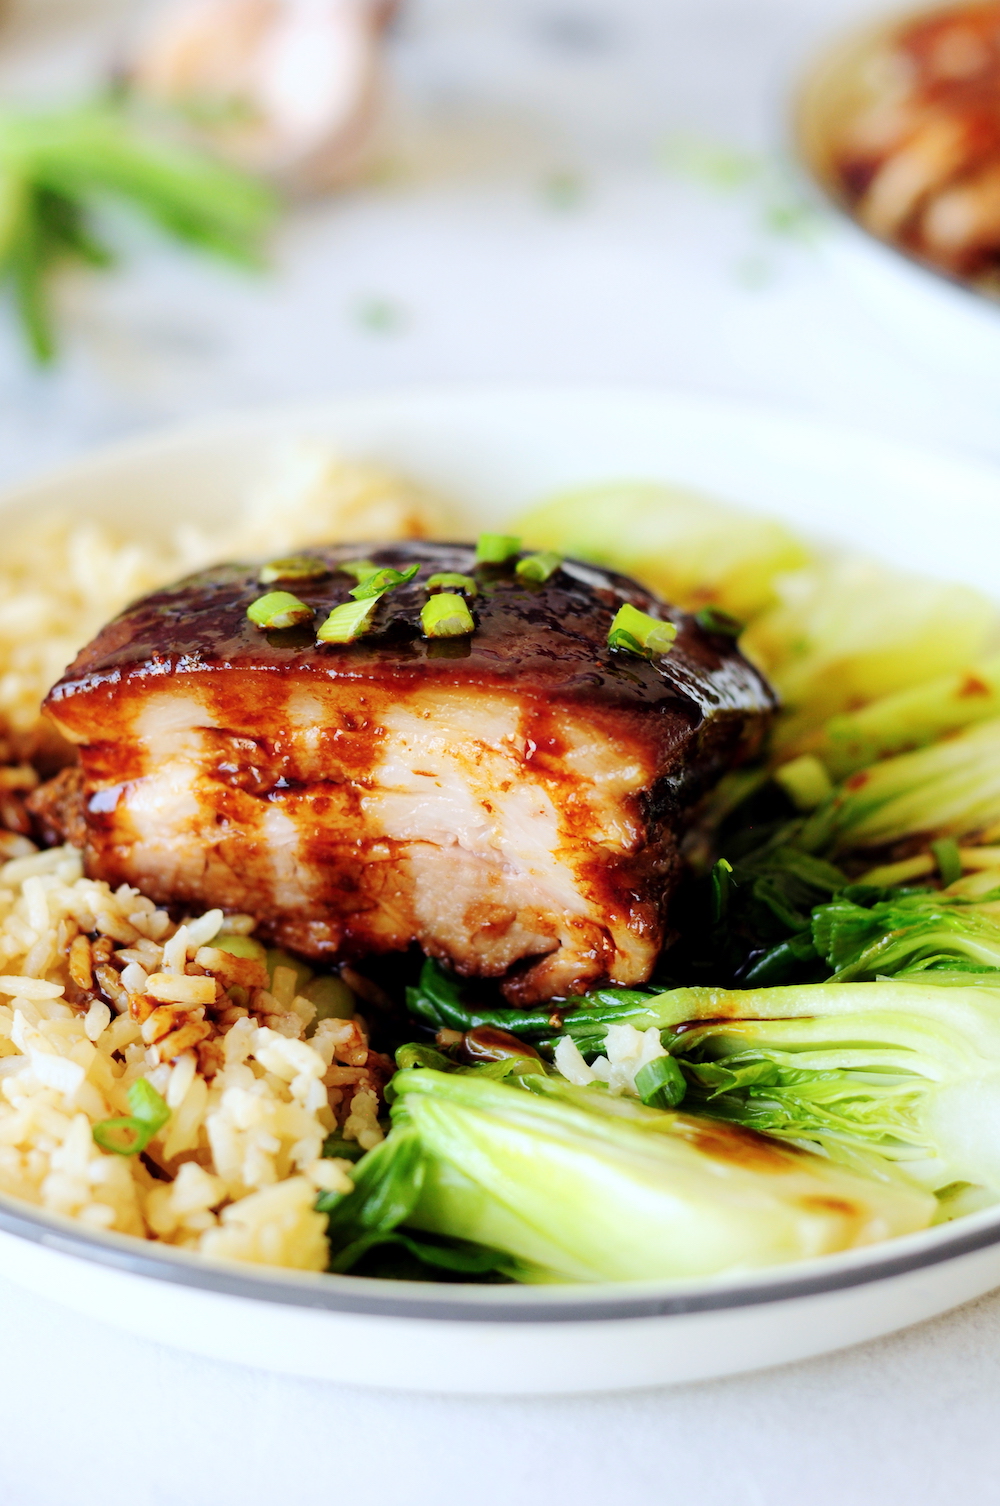 Red-Braised Sous Vide Pork Belly with Sauteed Bok Choy, a traditional classic Chinese recipe turned revolutionarily simple with the original melt-in-your-mouth texture and the authentic flavors!